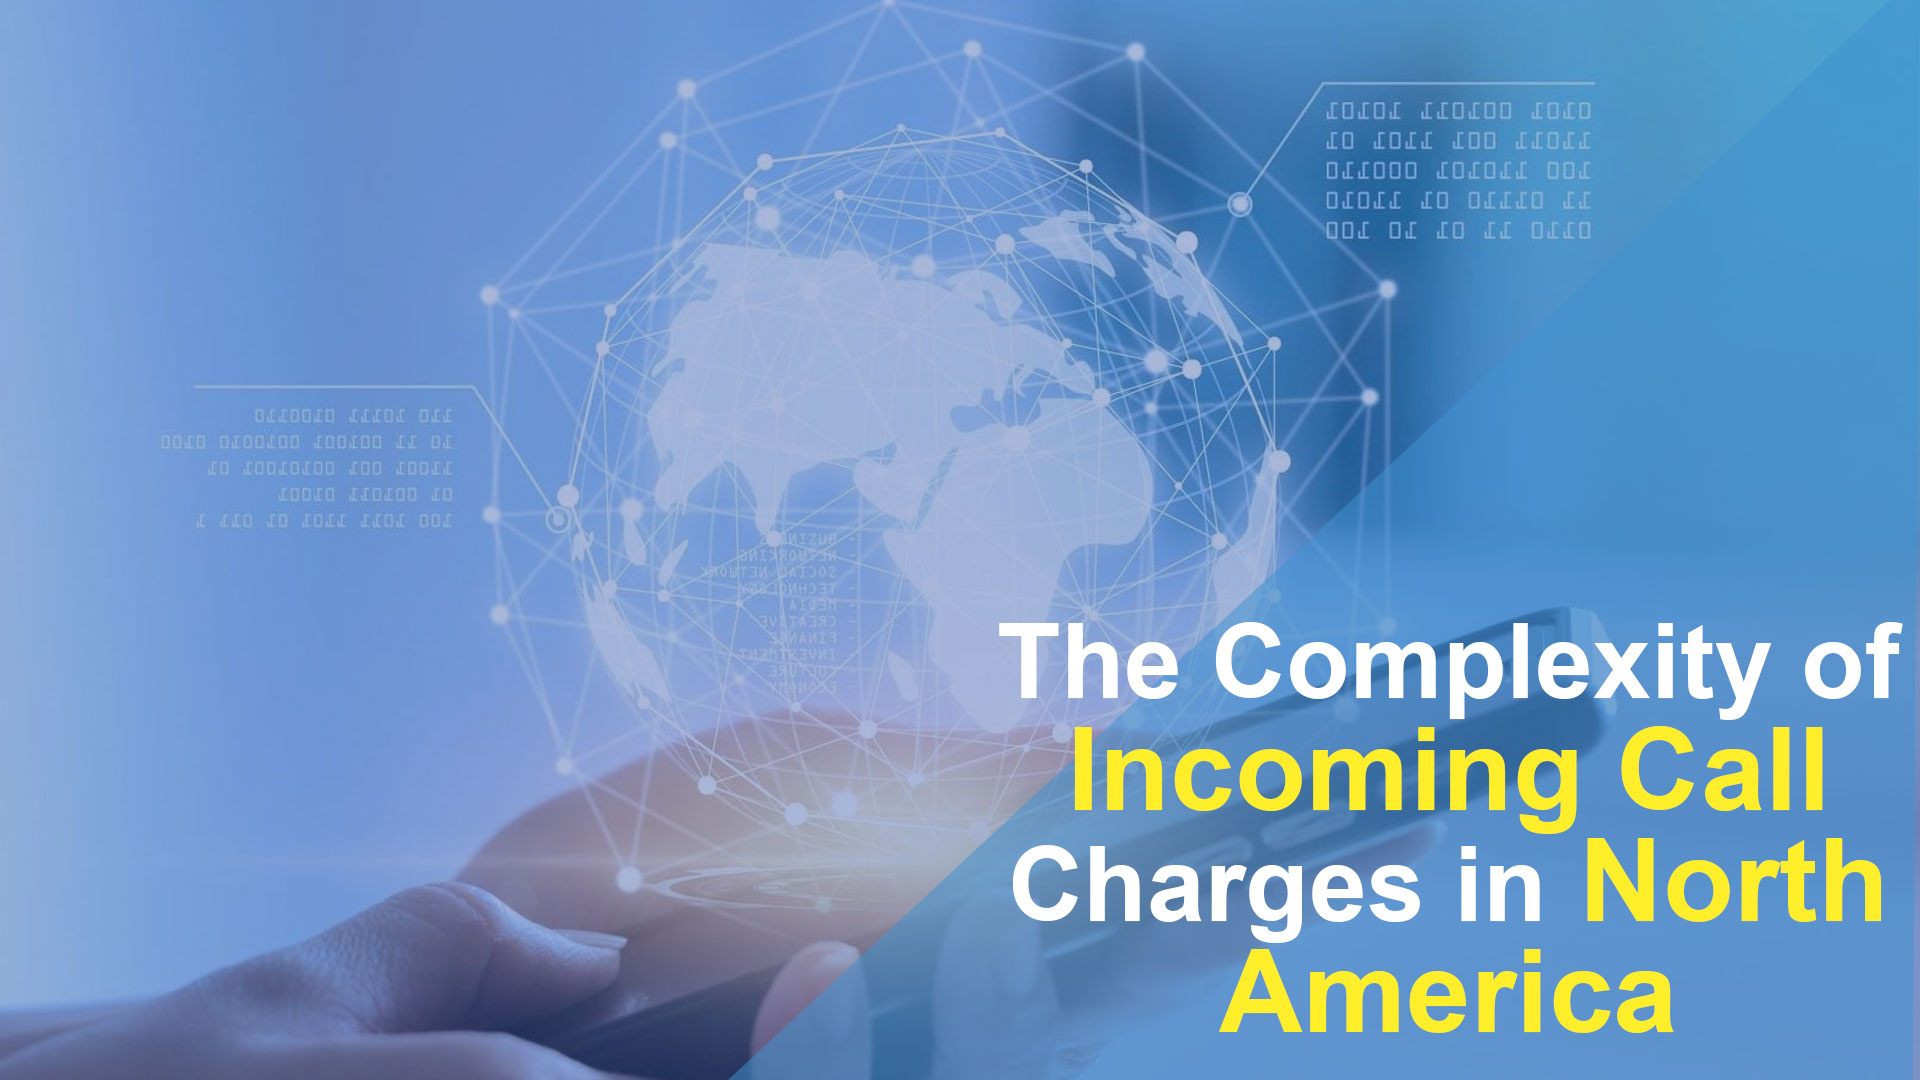 The Complexity of Incoming Call Charges in North America